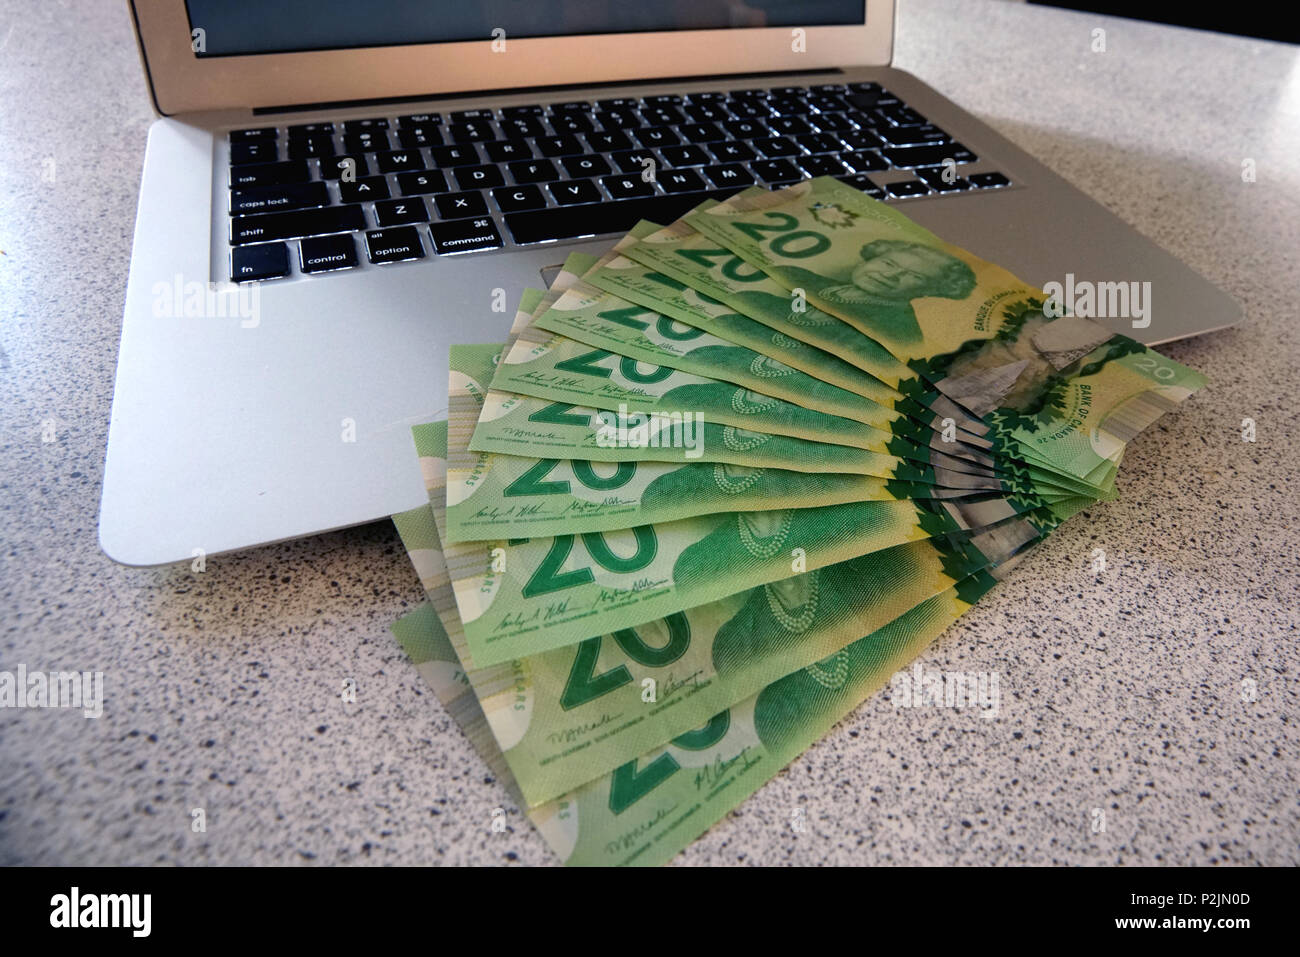 Montreal,Canada,15 June 2018.Display of 20 dollar bills of Canadian currency on a laptop computer.Credit:Mario Beauregard/Alamy Live News Stock Photo